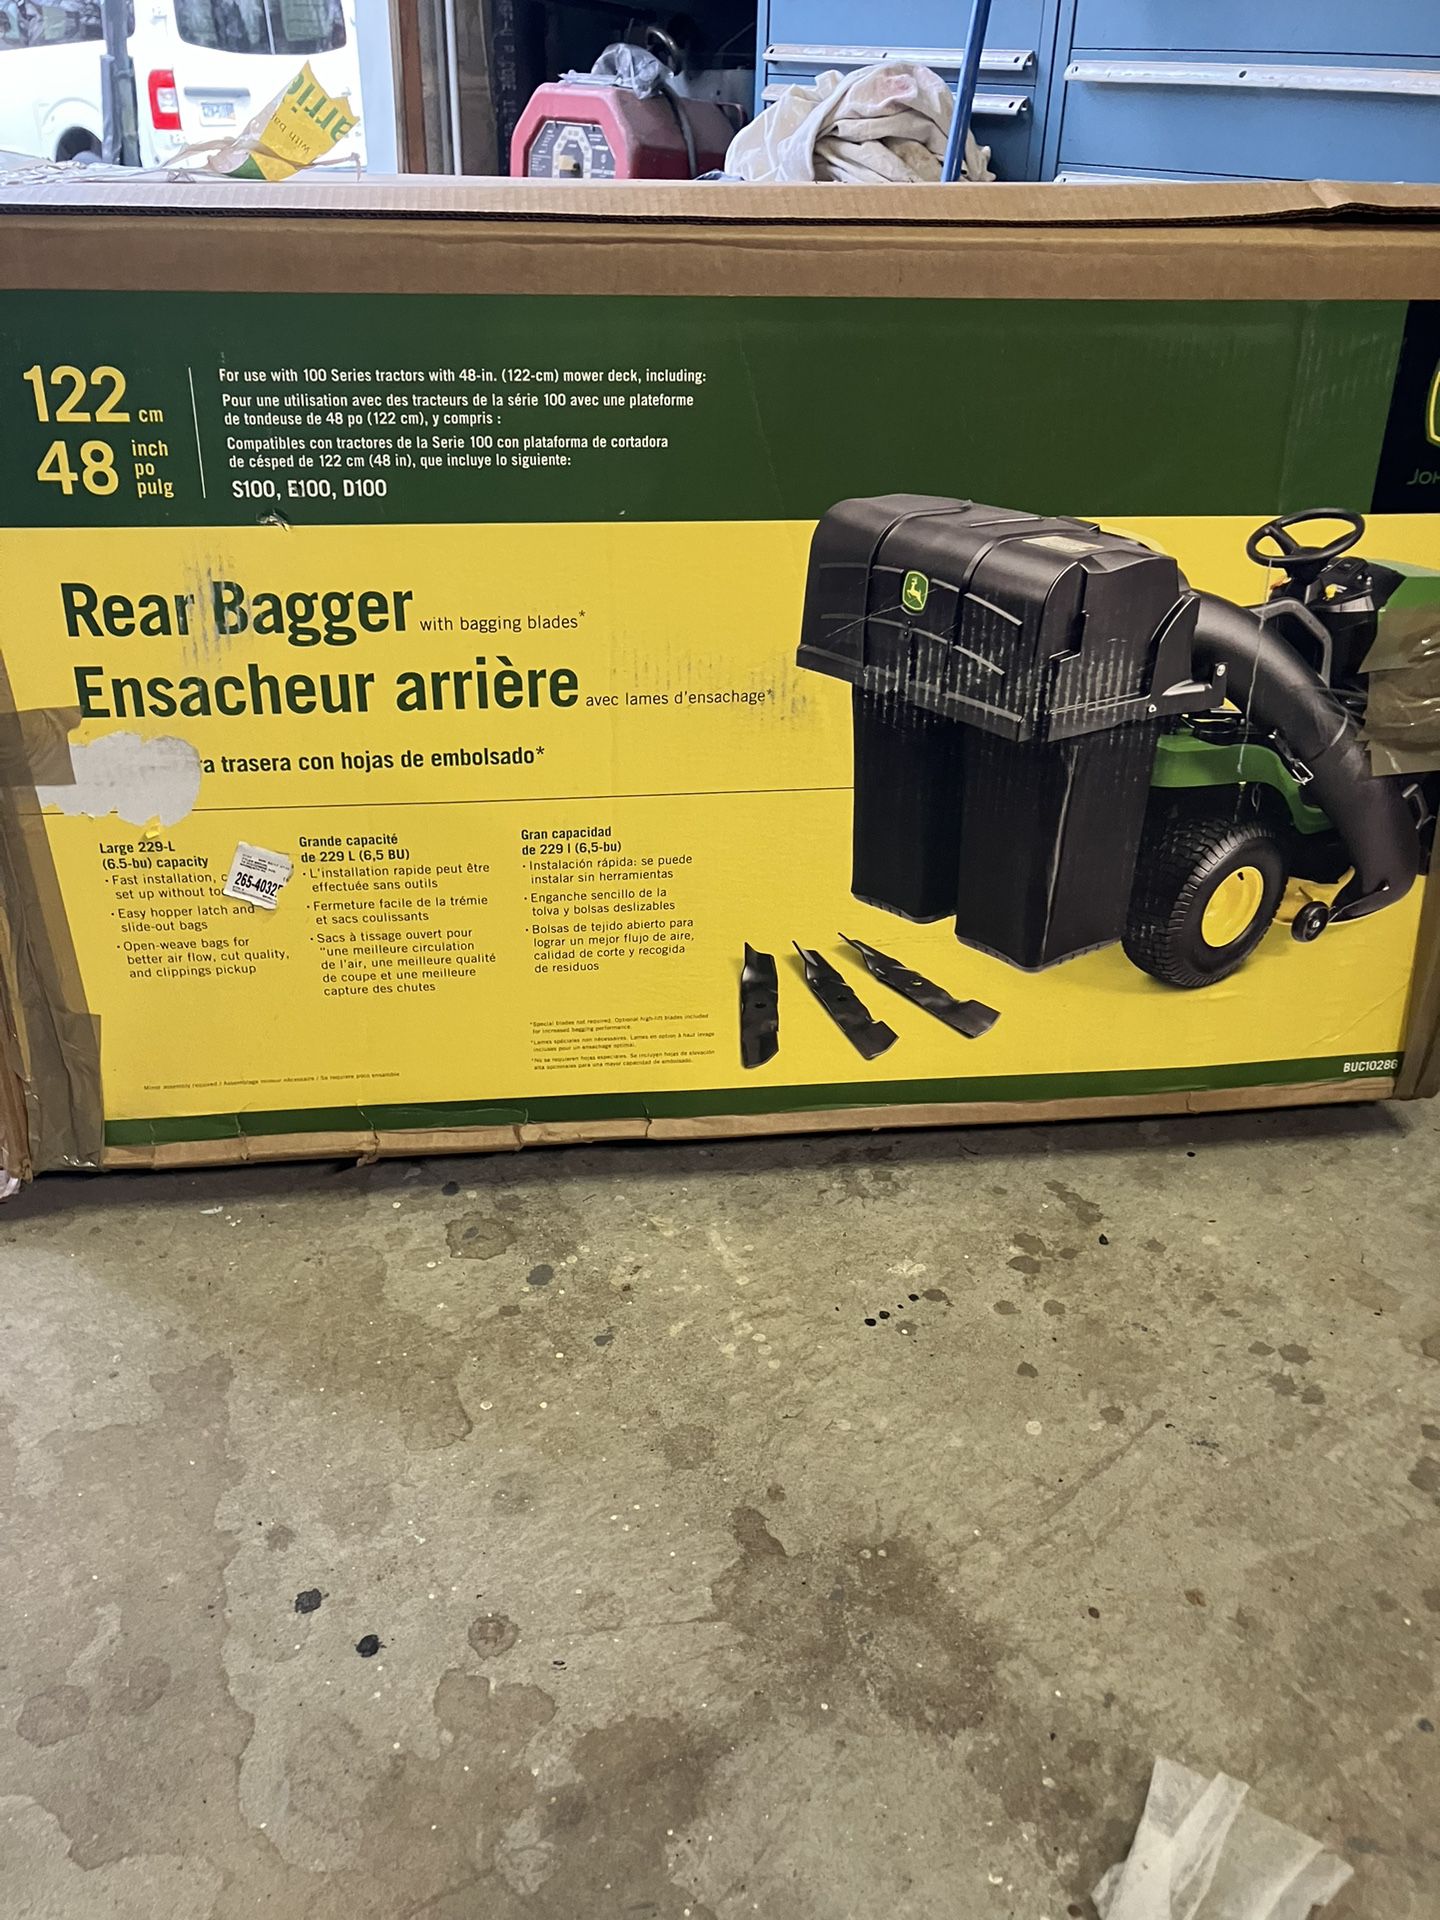 John Deere Rear Bagger For 42” And 48” Riding Mower With Blades. 